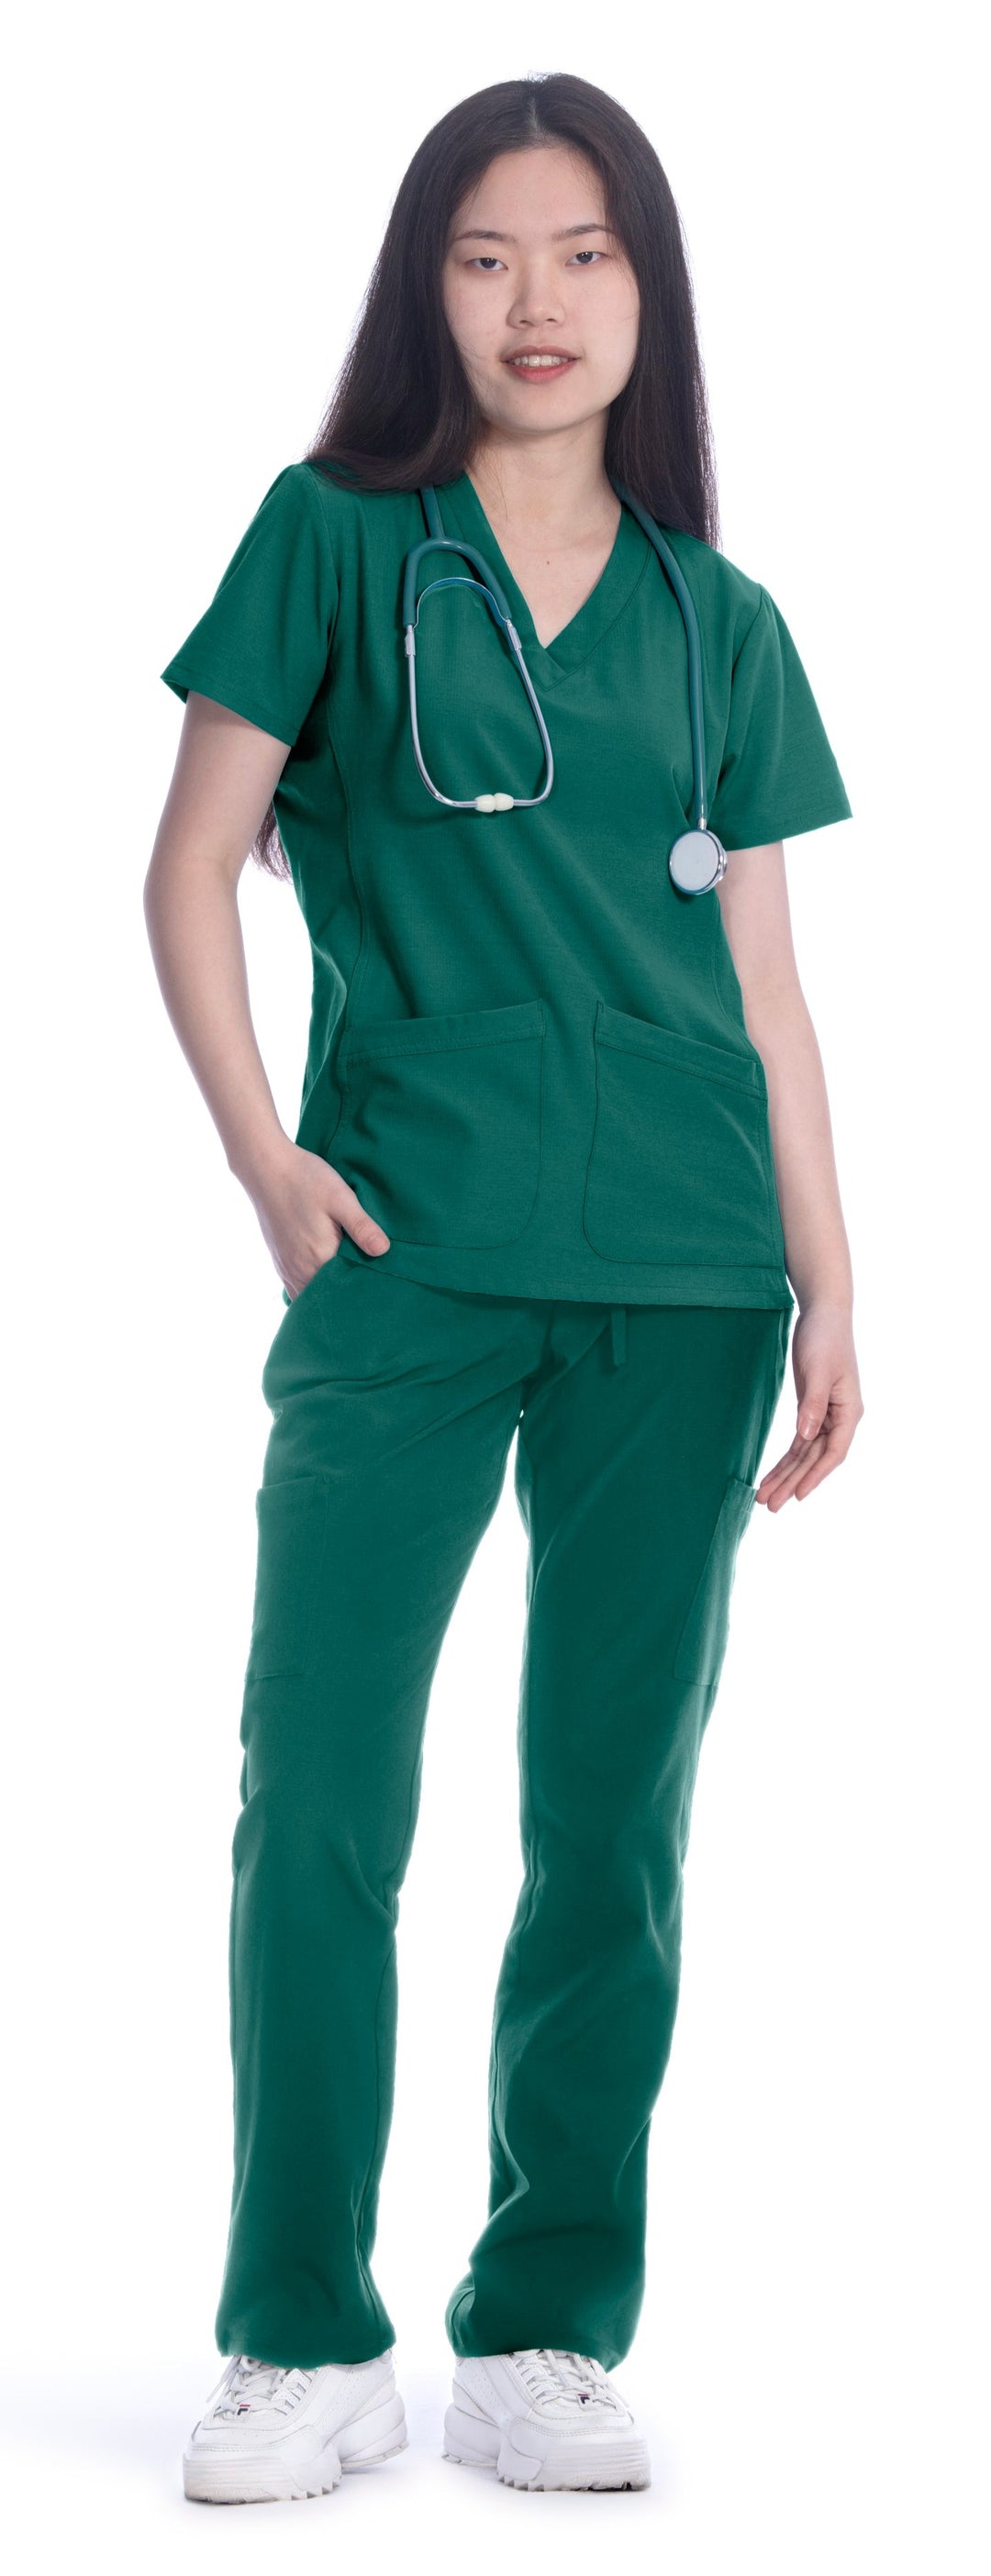 Style 1201 - 4-Way Stretch Scrub Top: The Ultimate in Comfort & Style